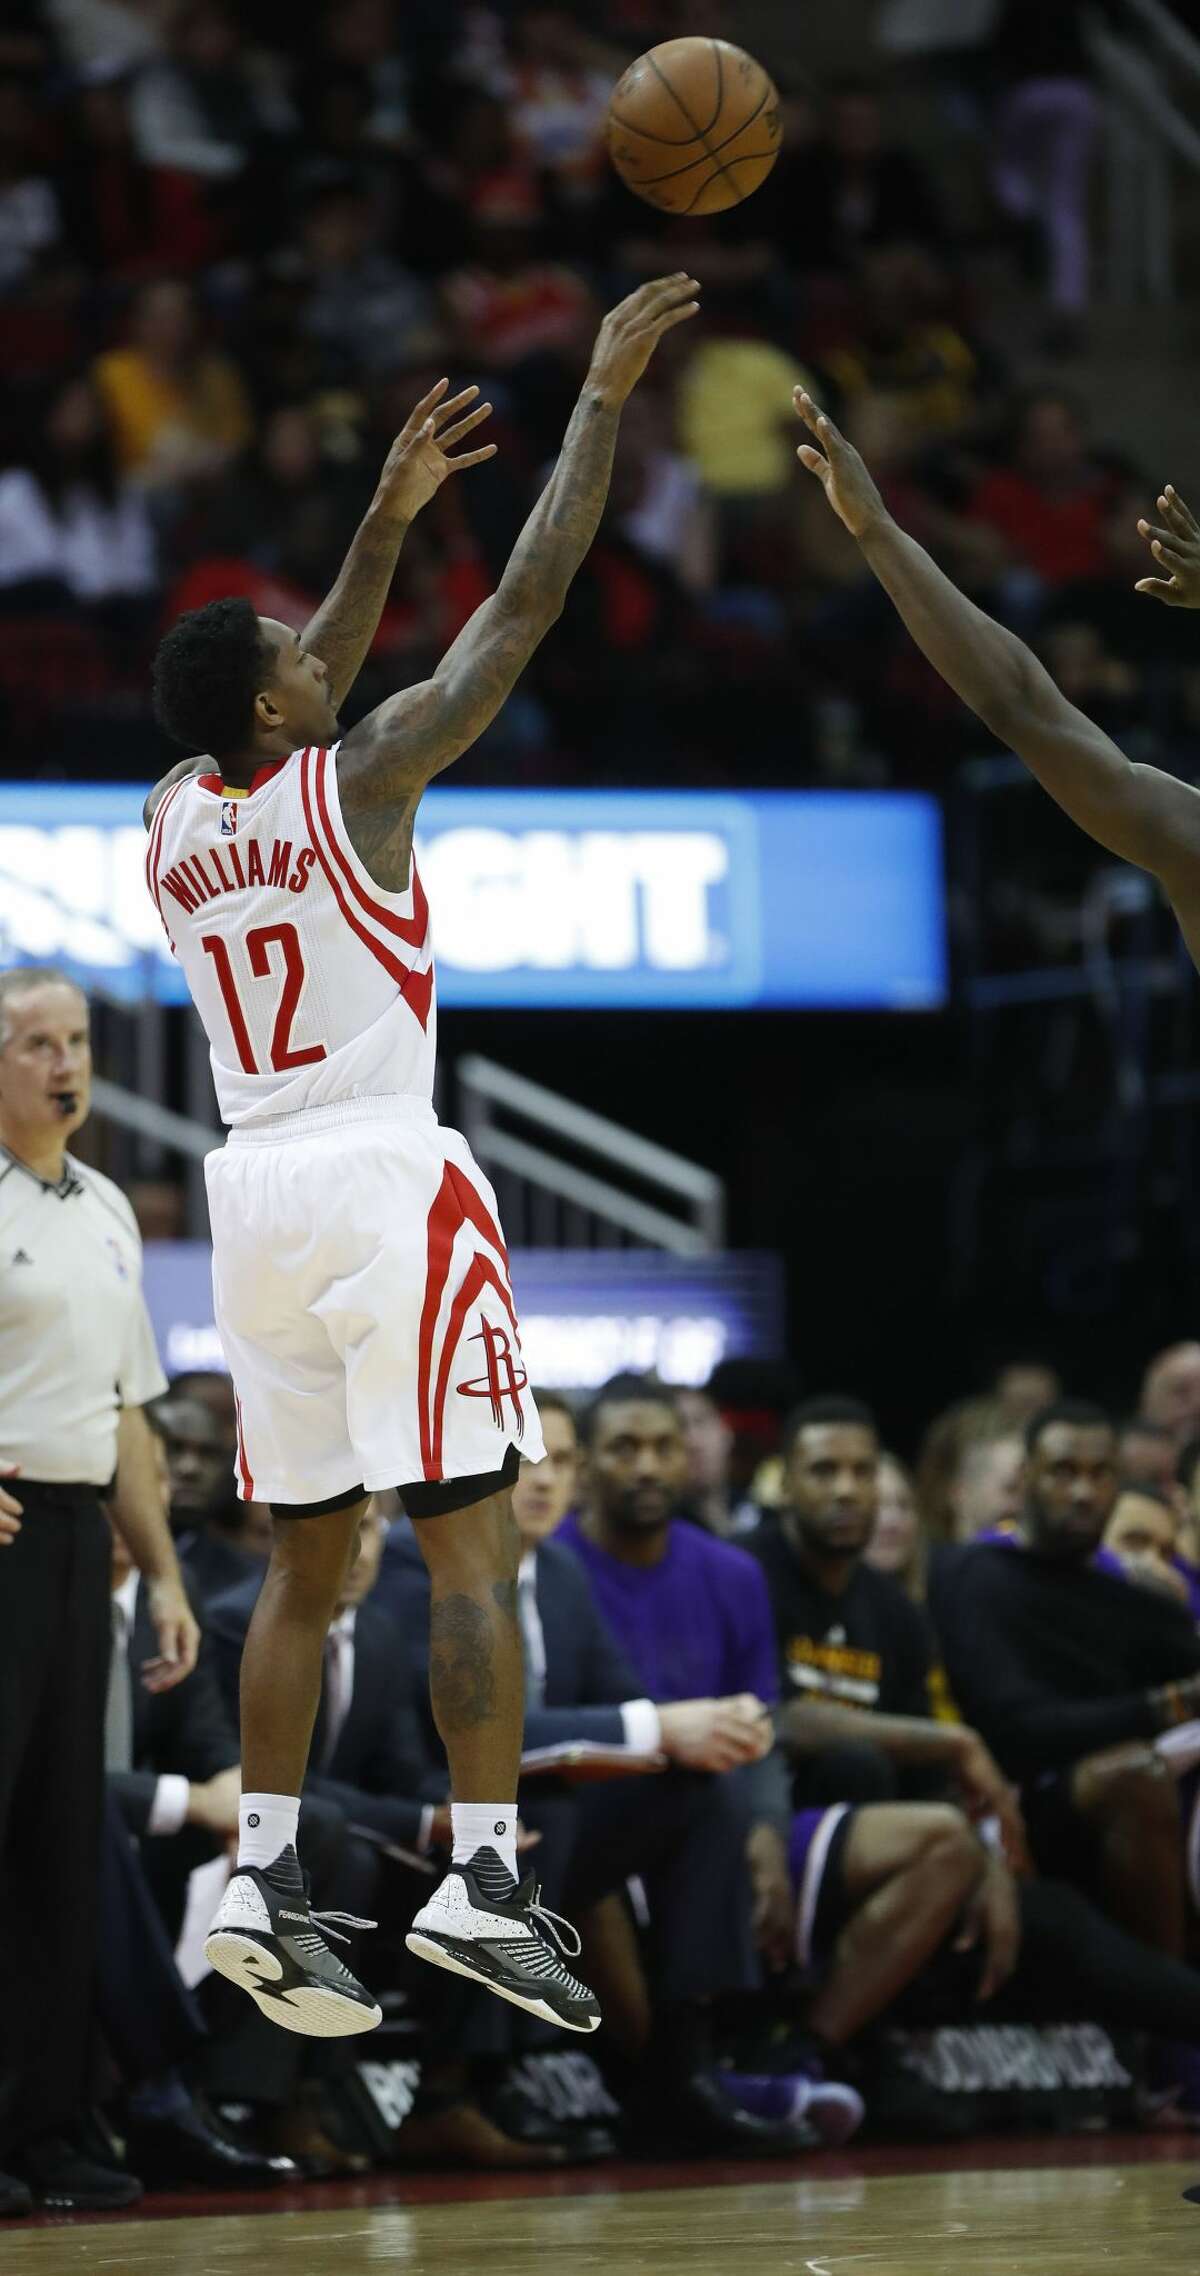 Houston Rockets guard Lou Williams (12) during the second half of an NBA game at Toyota Center, Wednesday, March 15, 2017, in Houston. ( Karen Warren / Houston Chronicle )